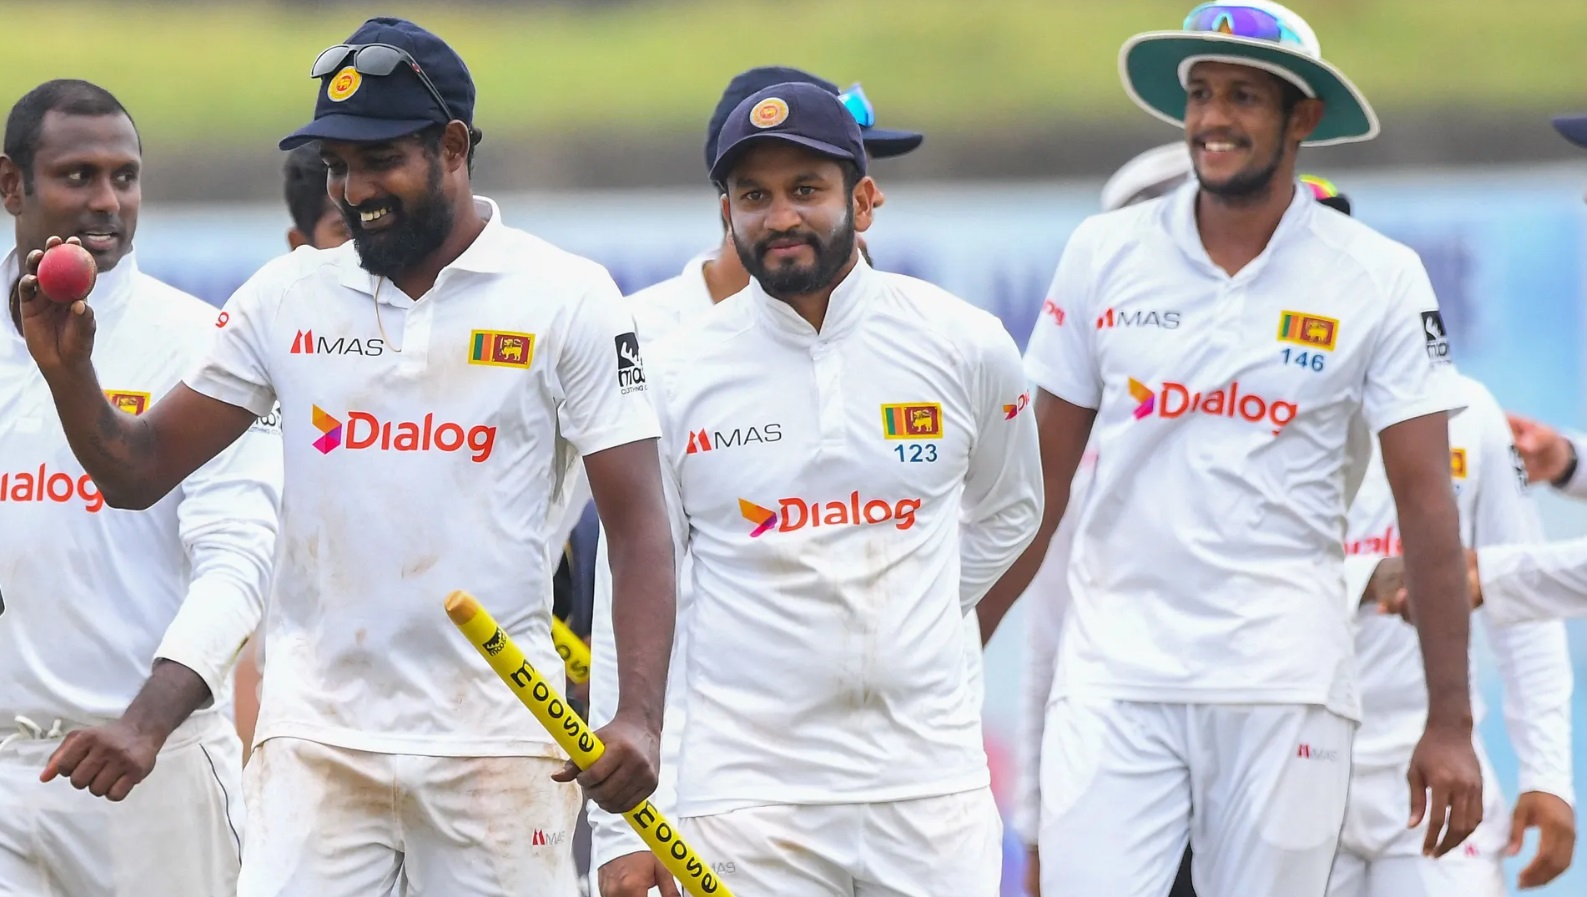 Reports | Second Sri Lanka versus Pakistan Test likely to be shifted to Galle